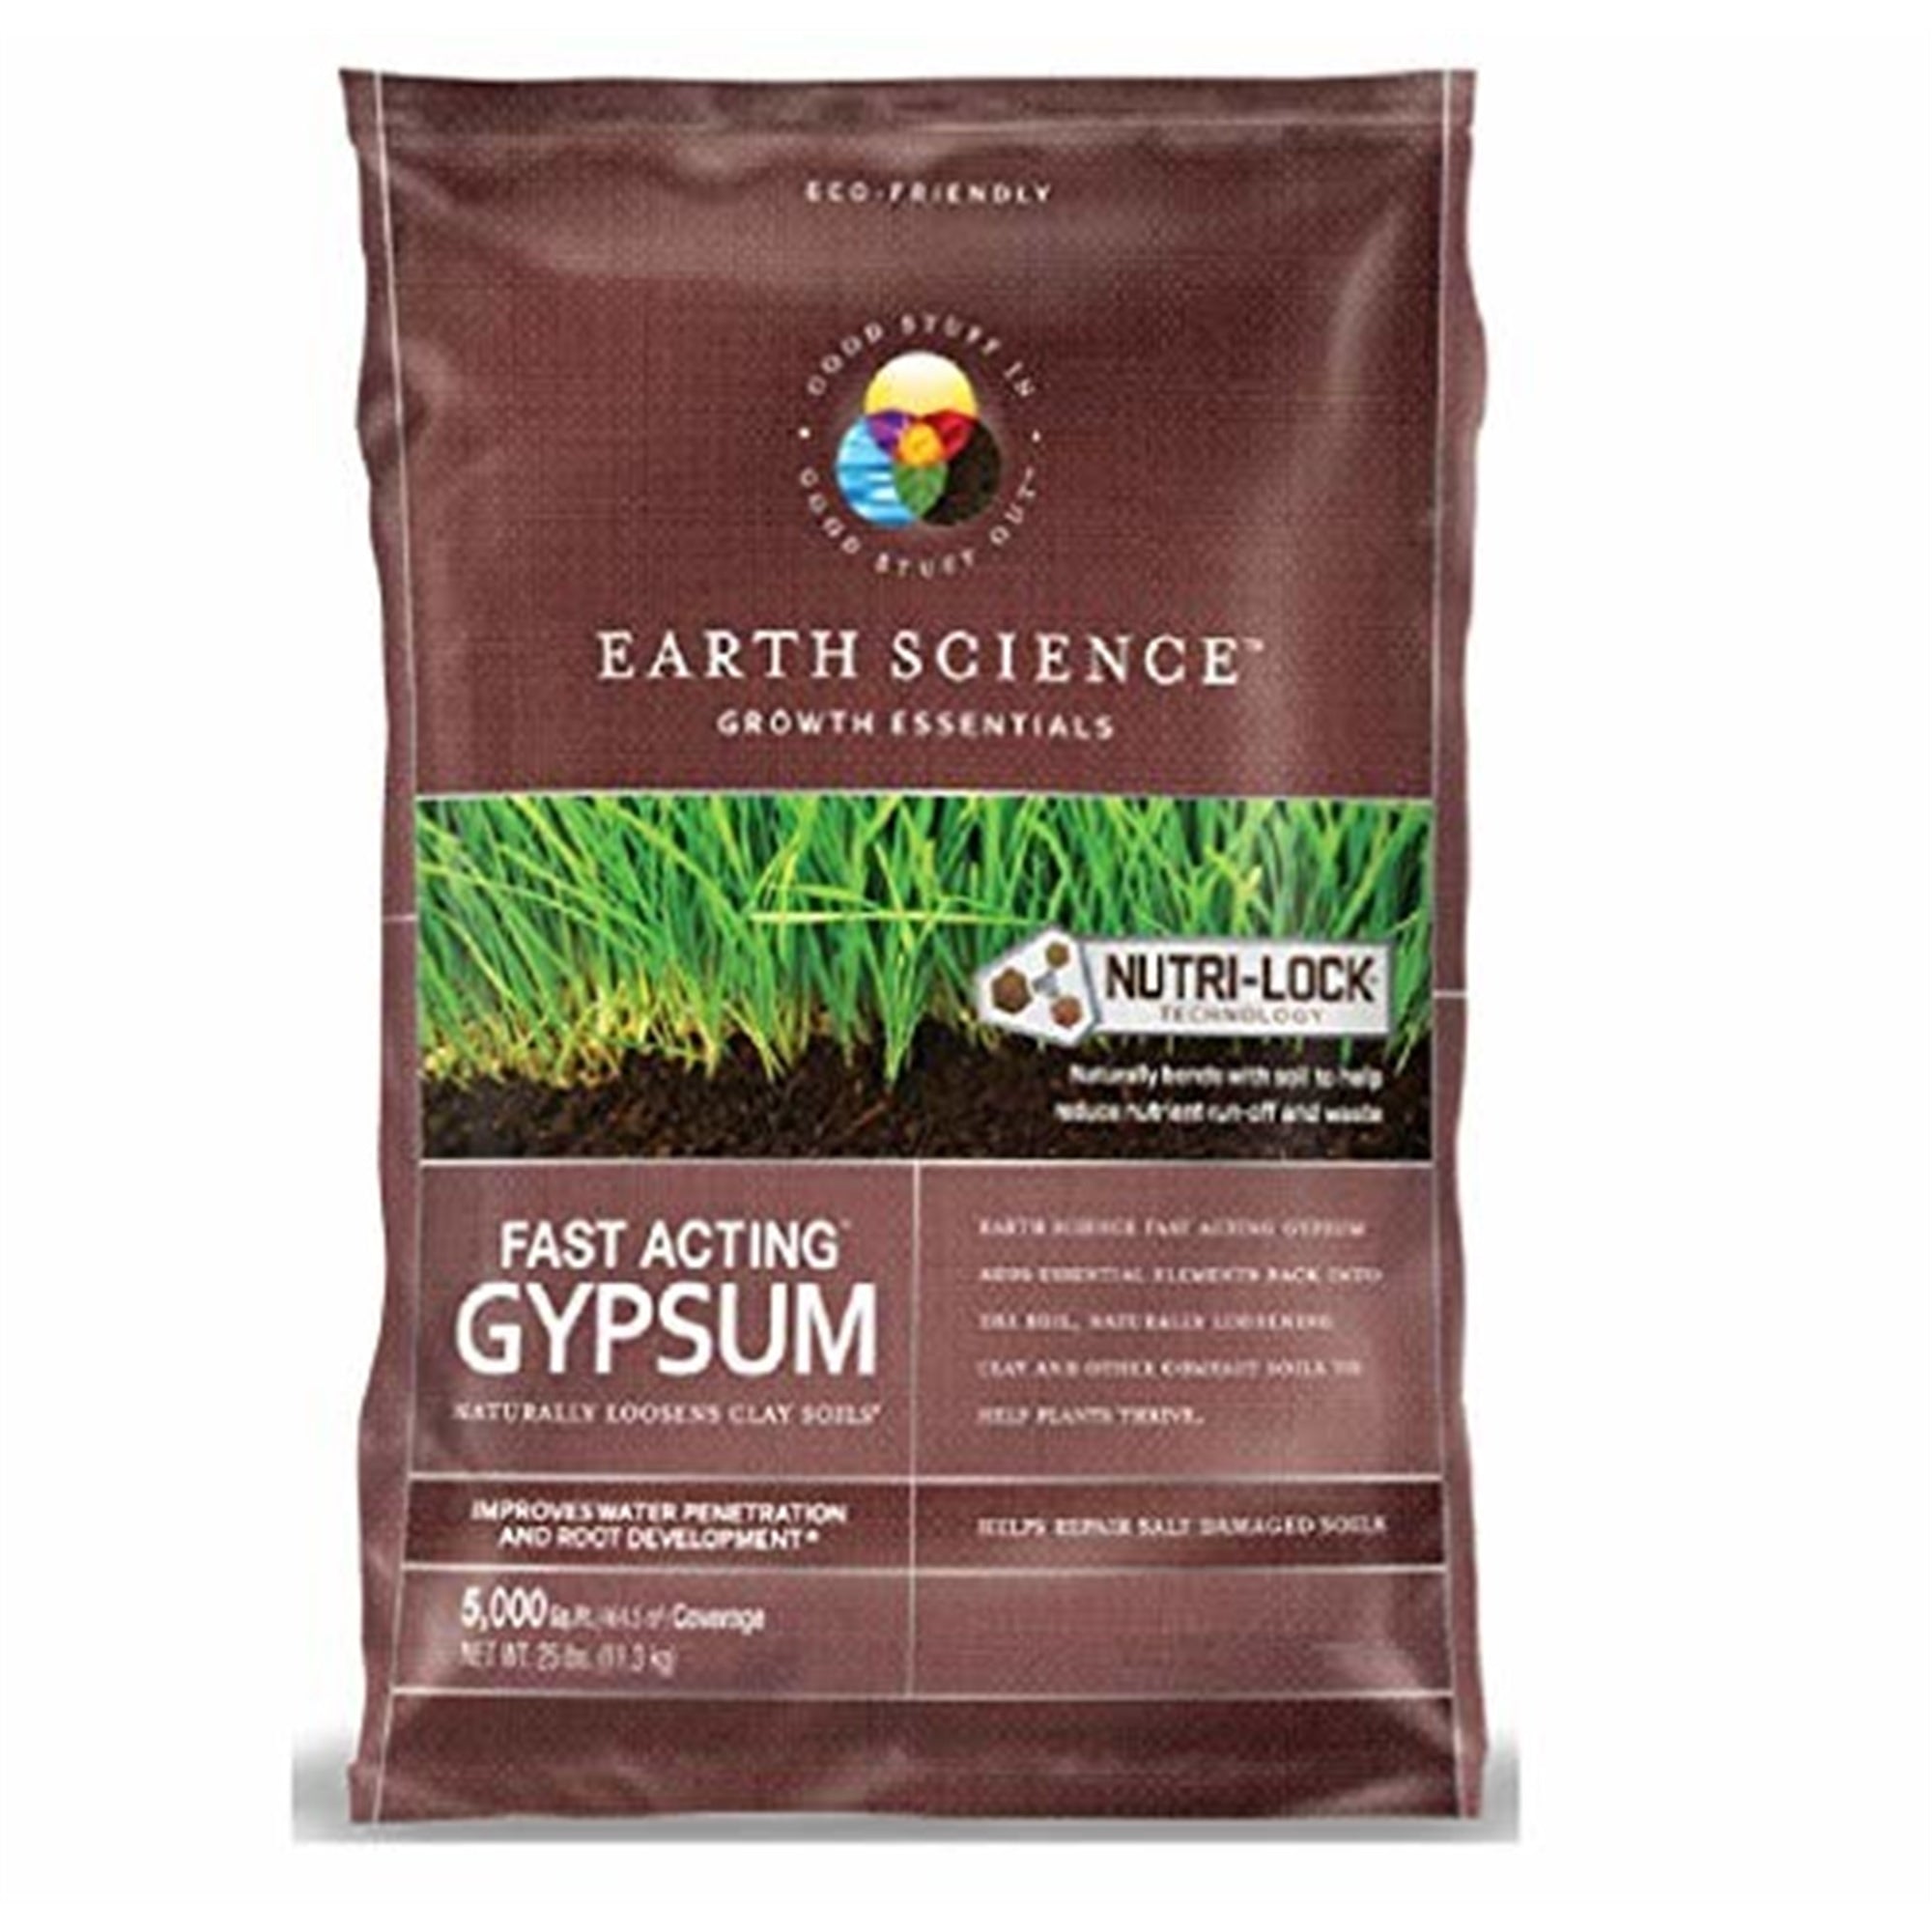 Earth Science Fast Acting Gypsum, 25 Lbs